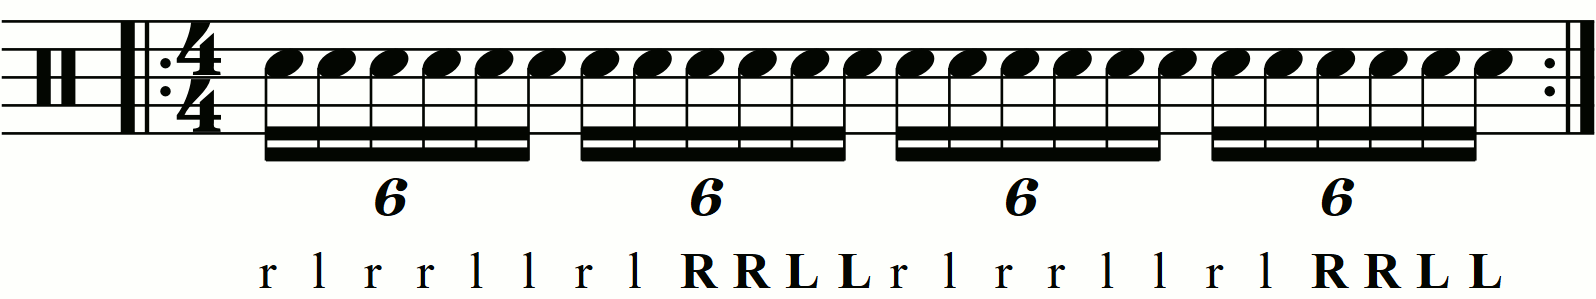 Accenting a paradiddle diddle